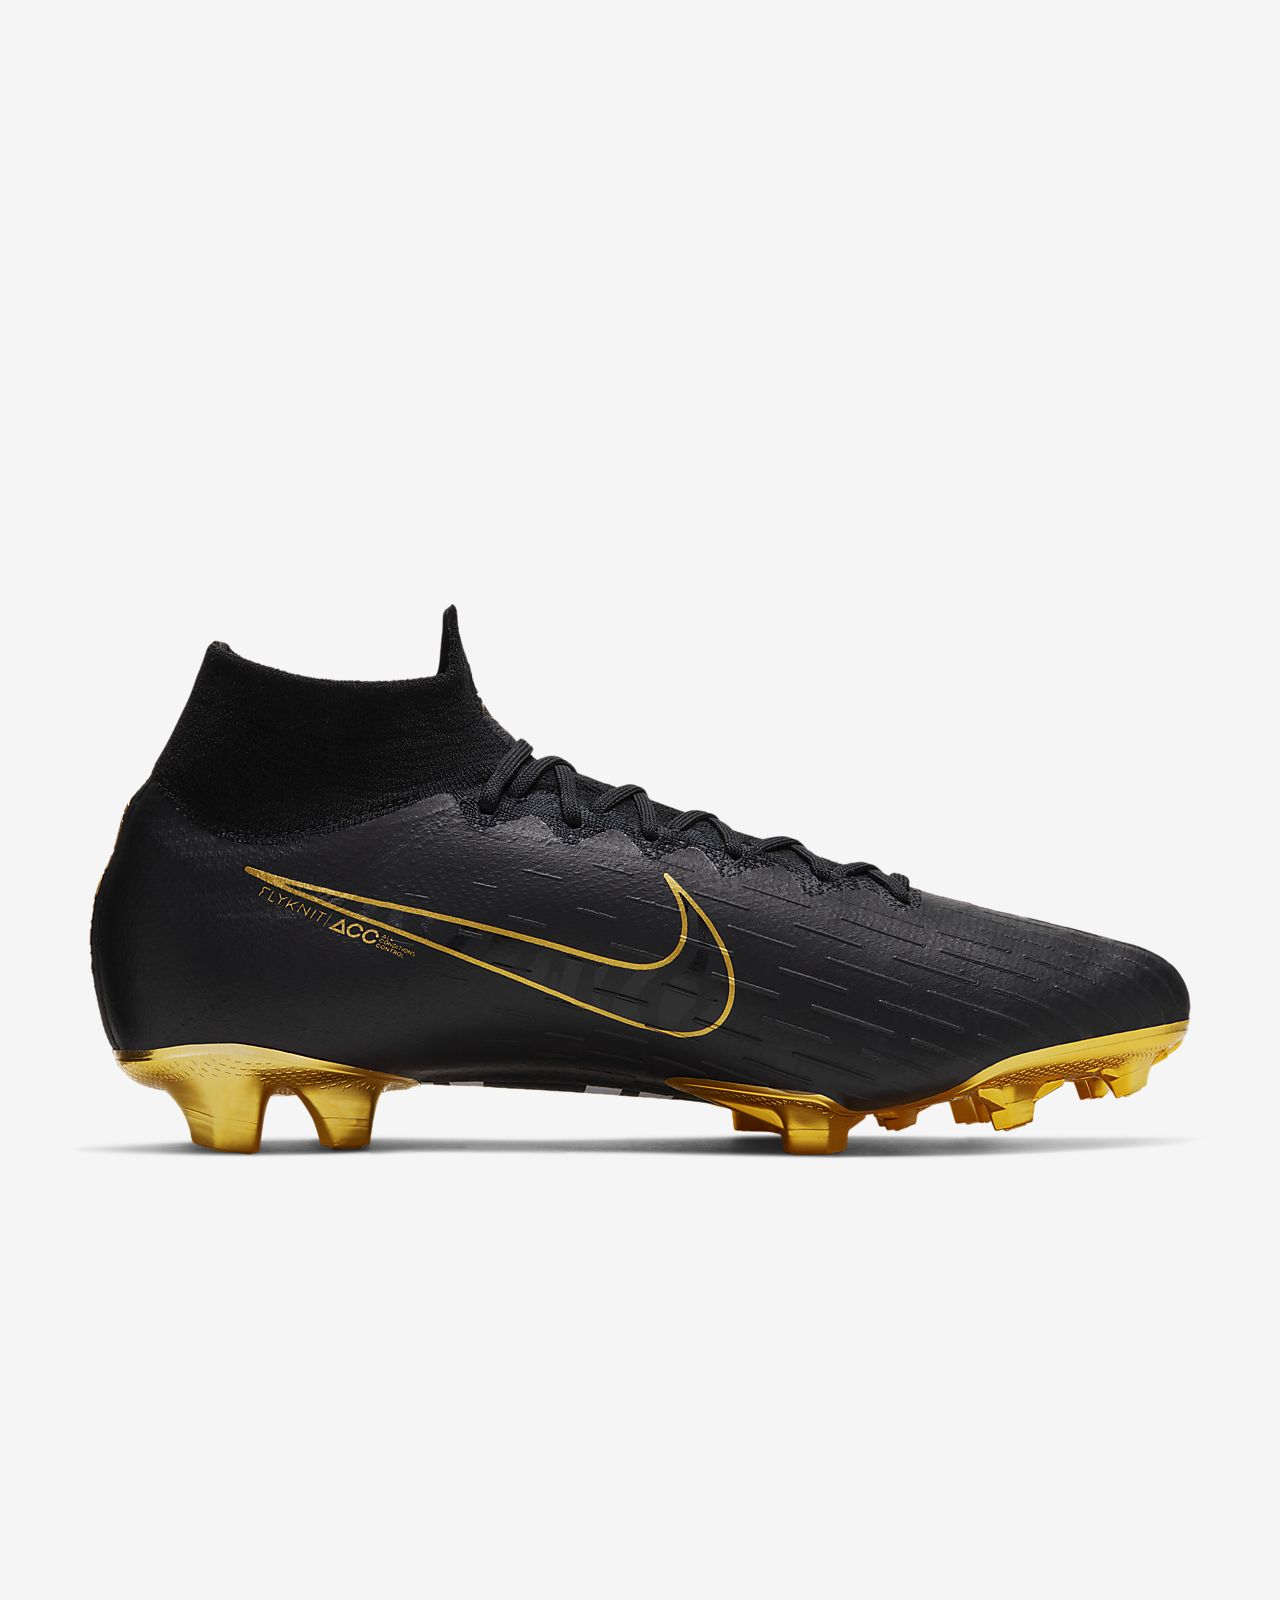 Hypervenom nike New and used Shoes and Footwear for